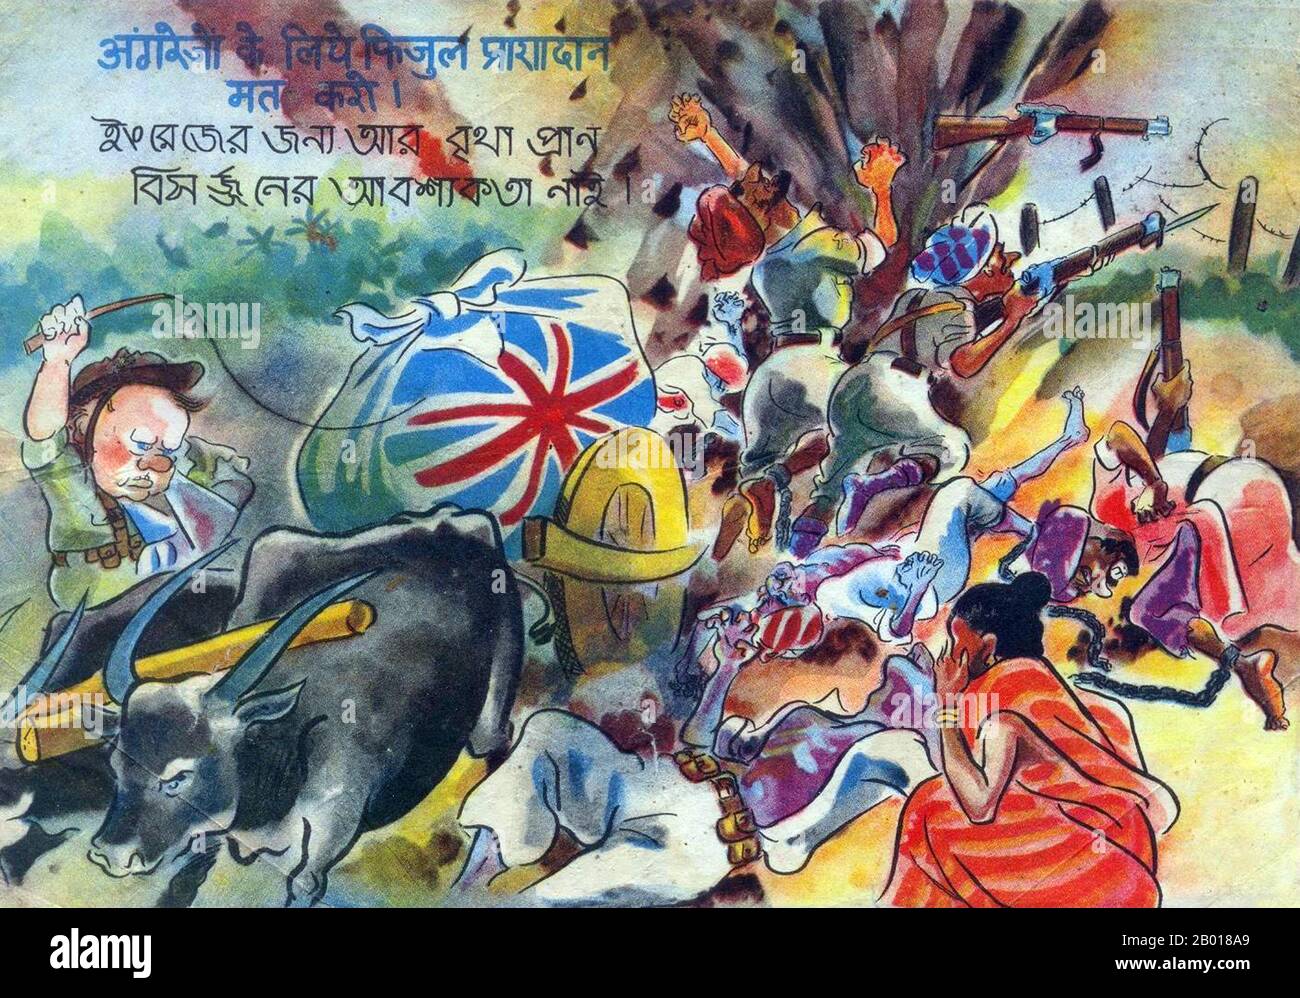 India: 'Don't waste your life for the English'. Japanese WWII propaganda leaflet showing a wounded Churchill (or John Bull) driving away a wagon of stolen wealth, while chained Indian soldiers are forced to fight and an Indian woman weeps, c. 1941-1944.  China Burma India Theatre (CBI) was the name used by the United States Army for its forces operating in conjunction with British and Chinese Allied air and land forces in China, Burma, and India during World War II. Well-known US units in this theatre included the Flying Tigers, transport and bomber units flying the Hump. Stock Photo